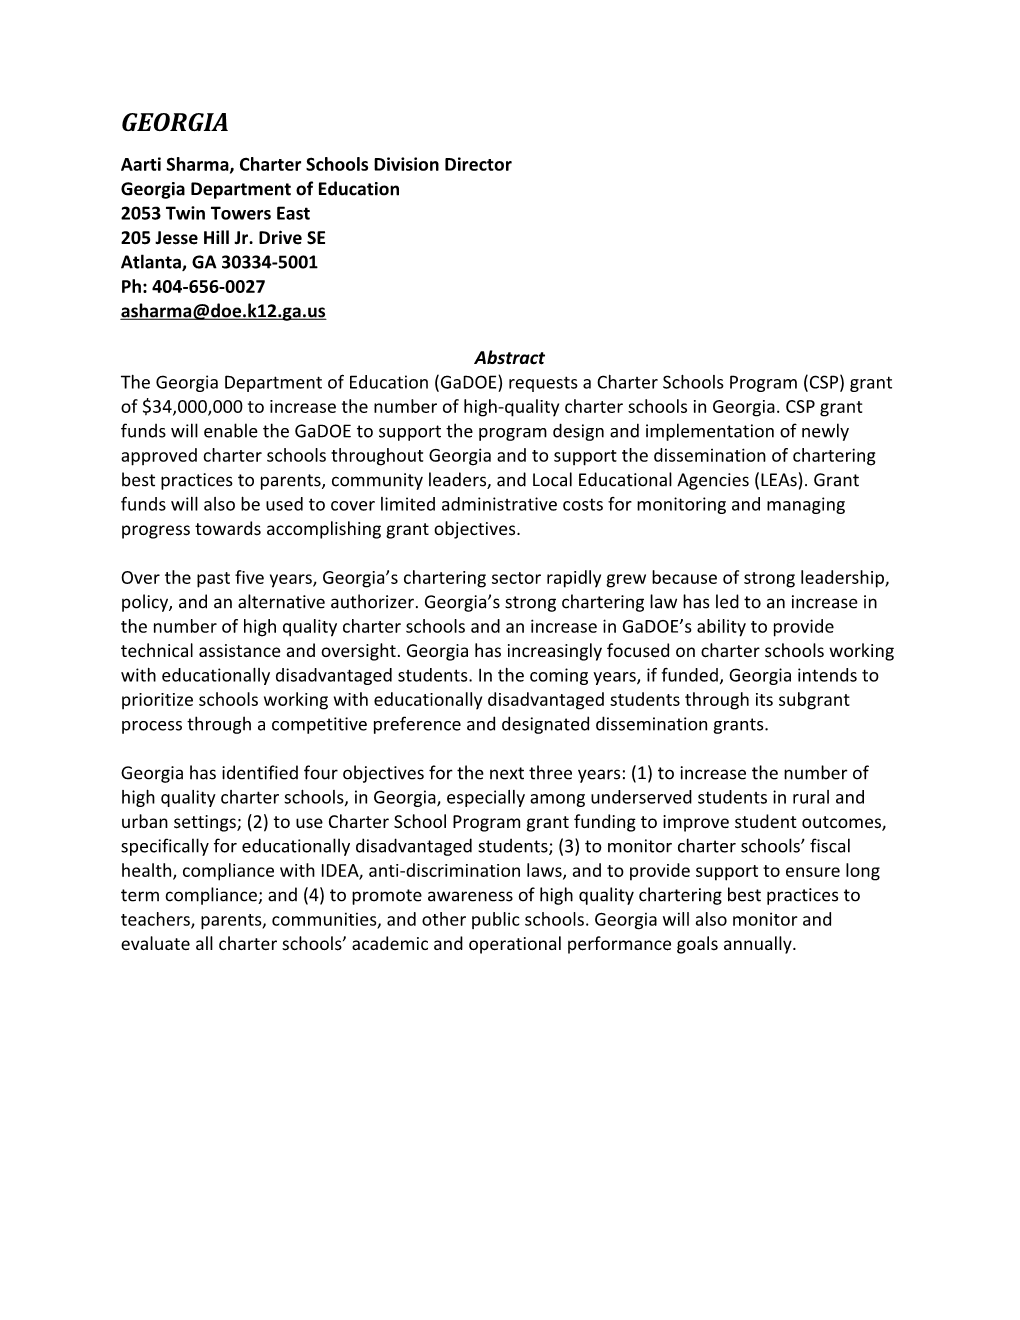 Georgia Department of Education Abstract (MS Word)